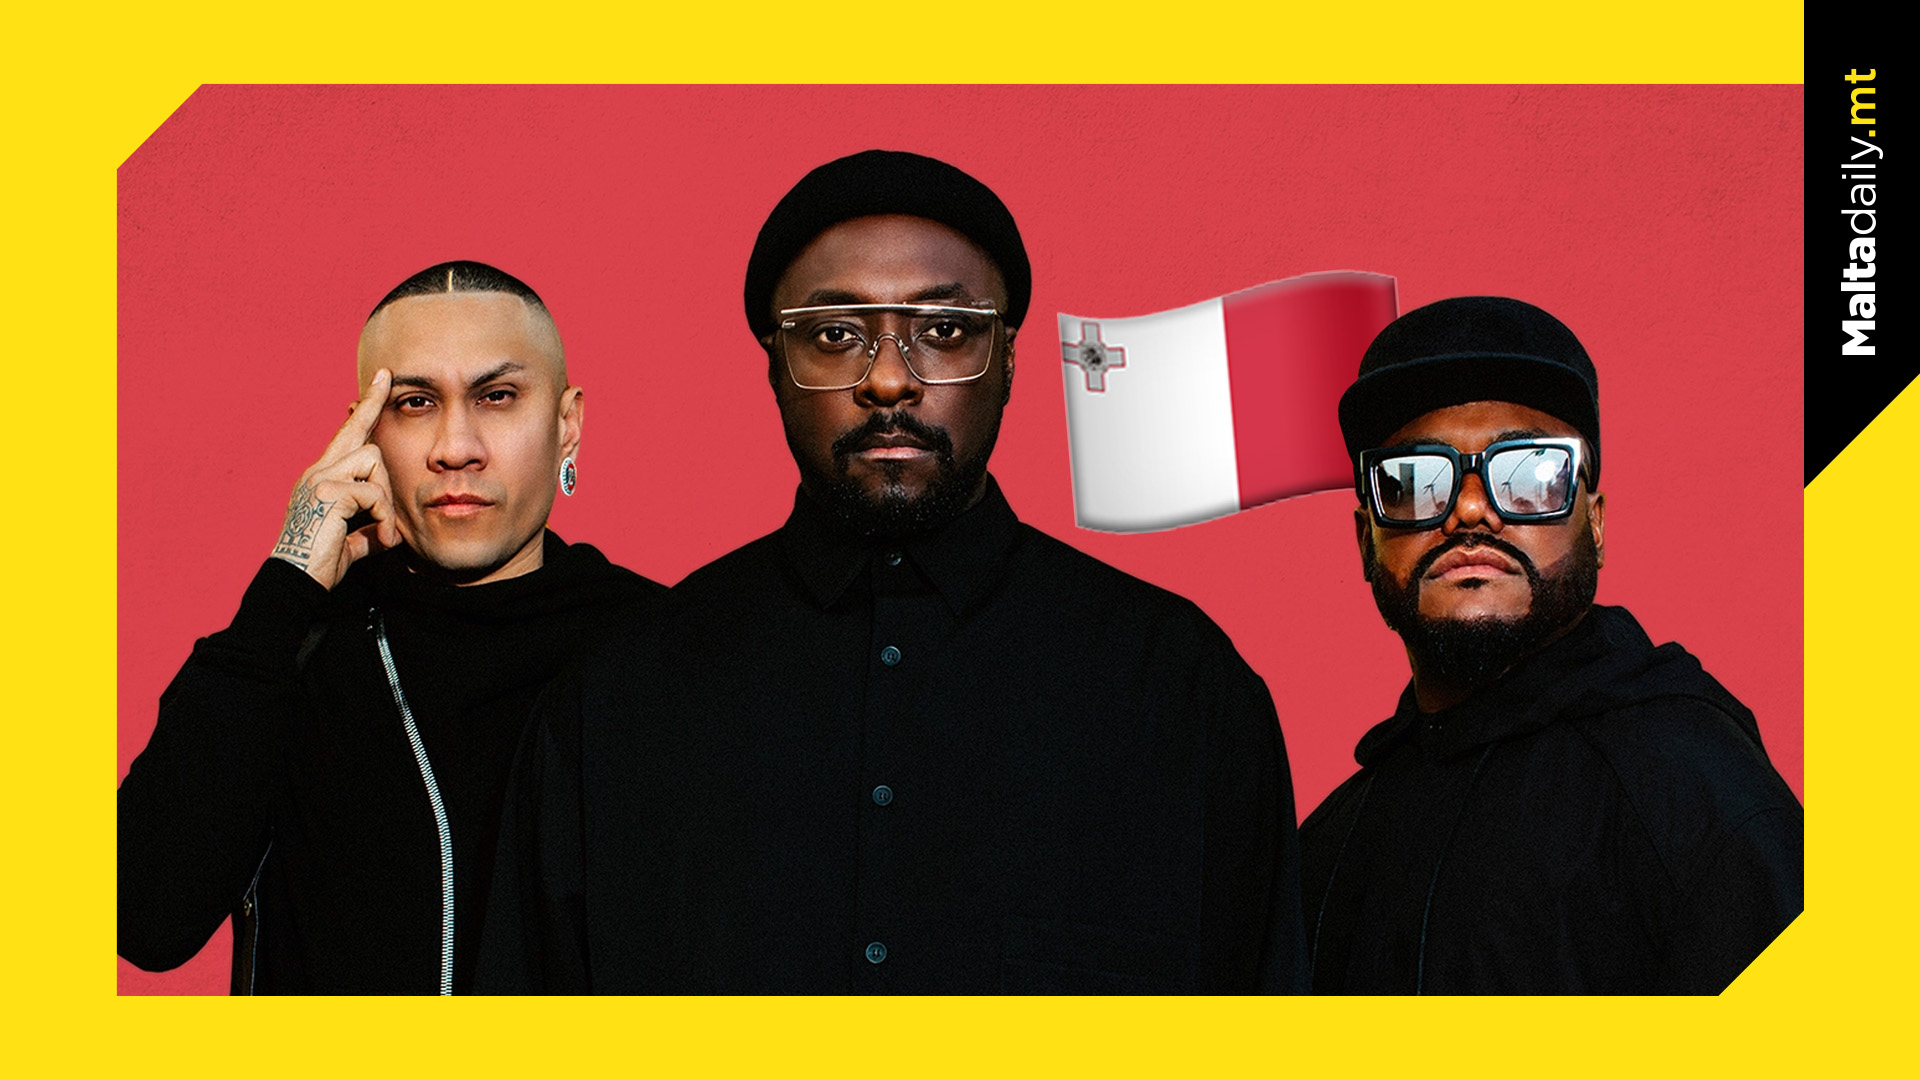 Black Eyed Peas in Malta for the second time